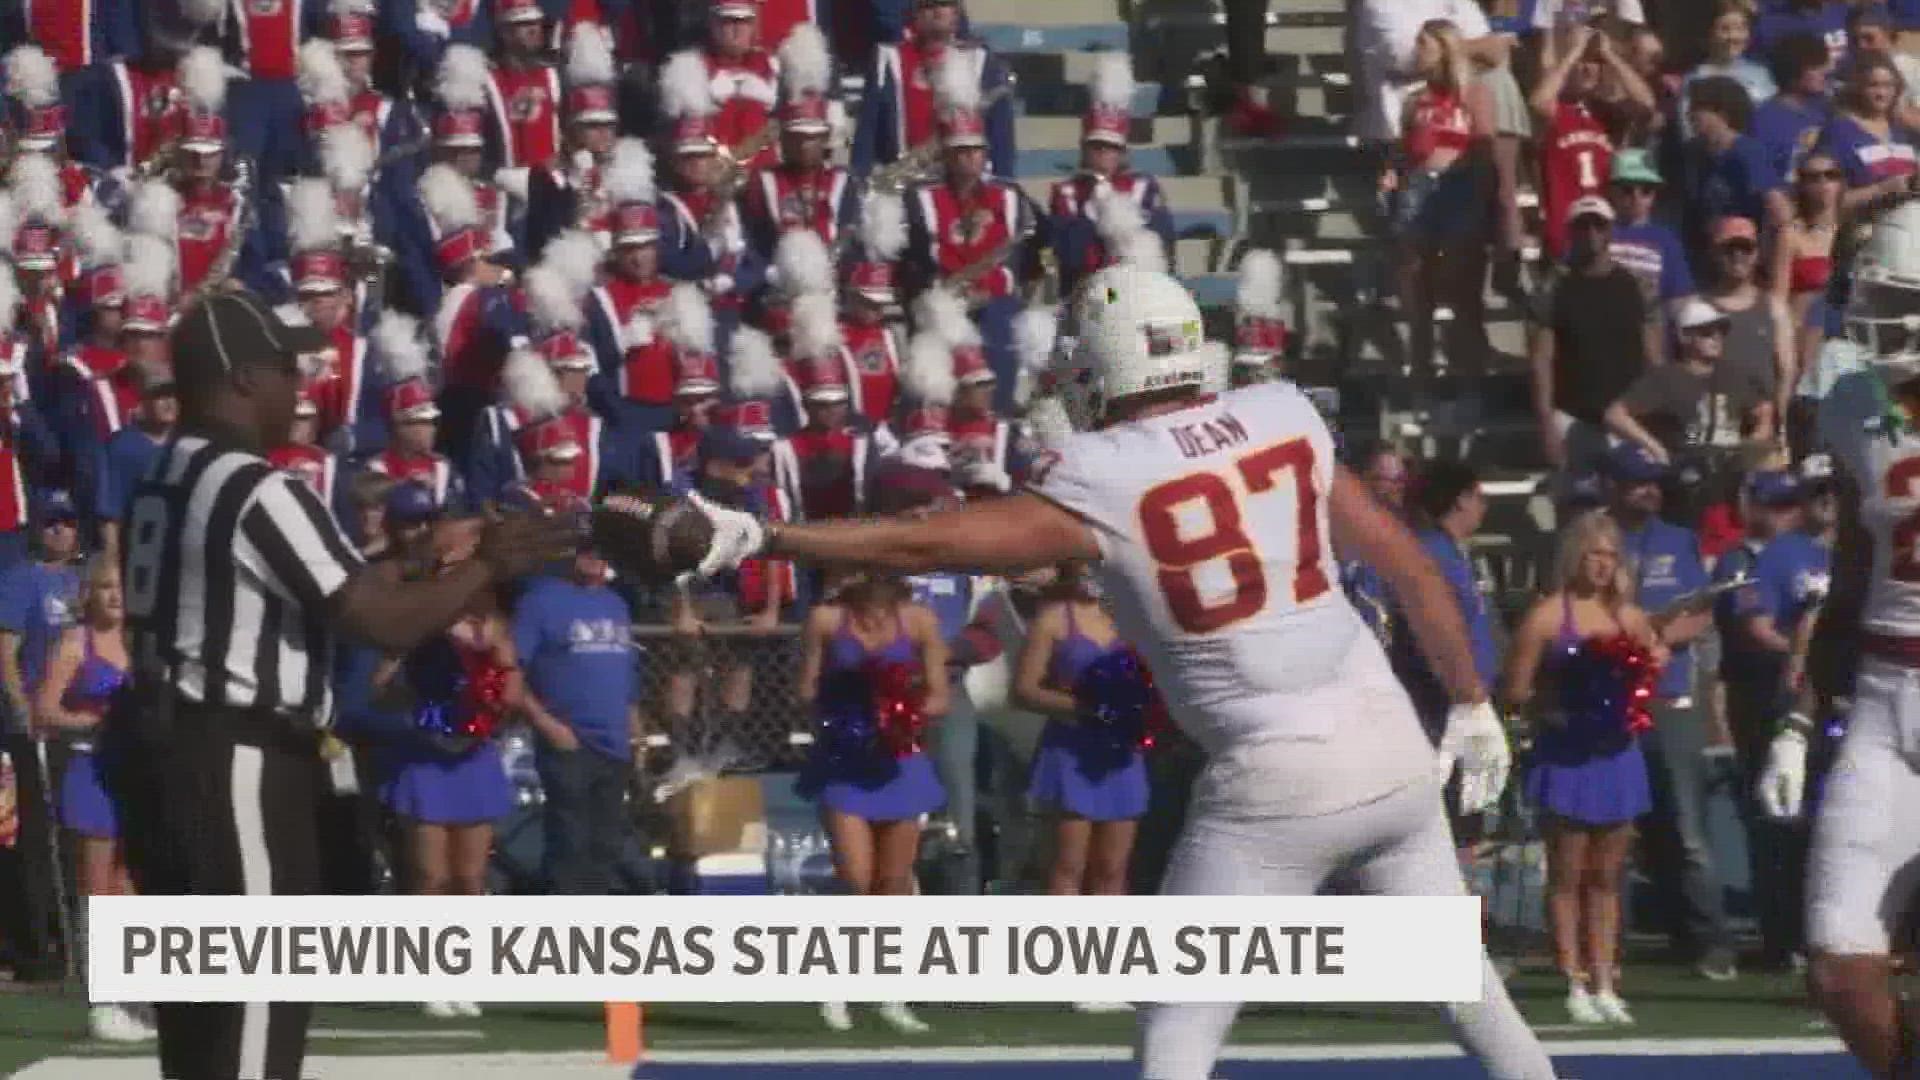 This weekend, Iowa State will face Kansas State, after a heartbreaking loss against Kansas this past weekend.